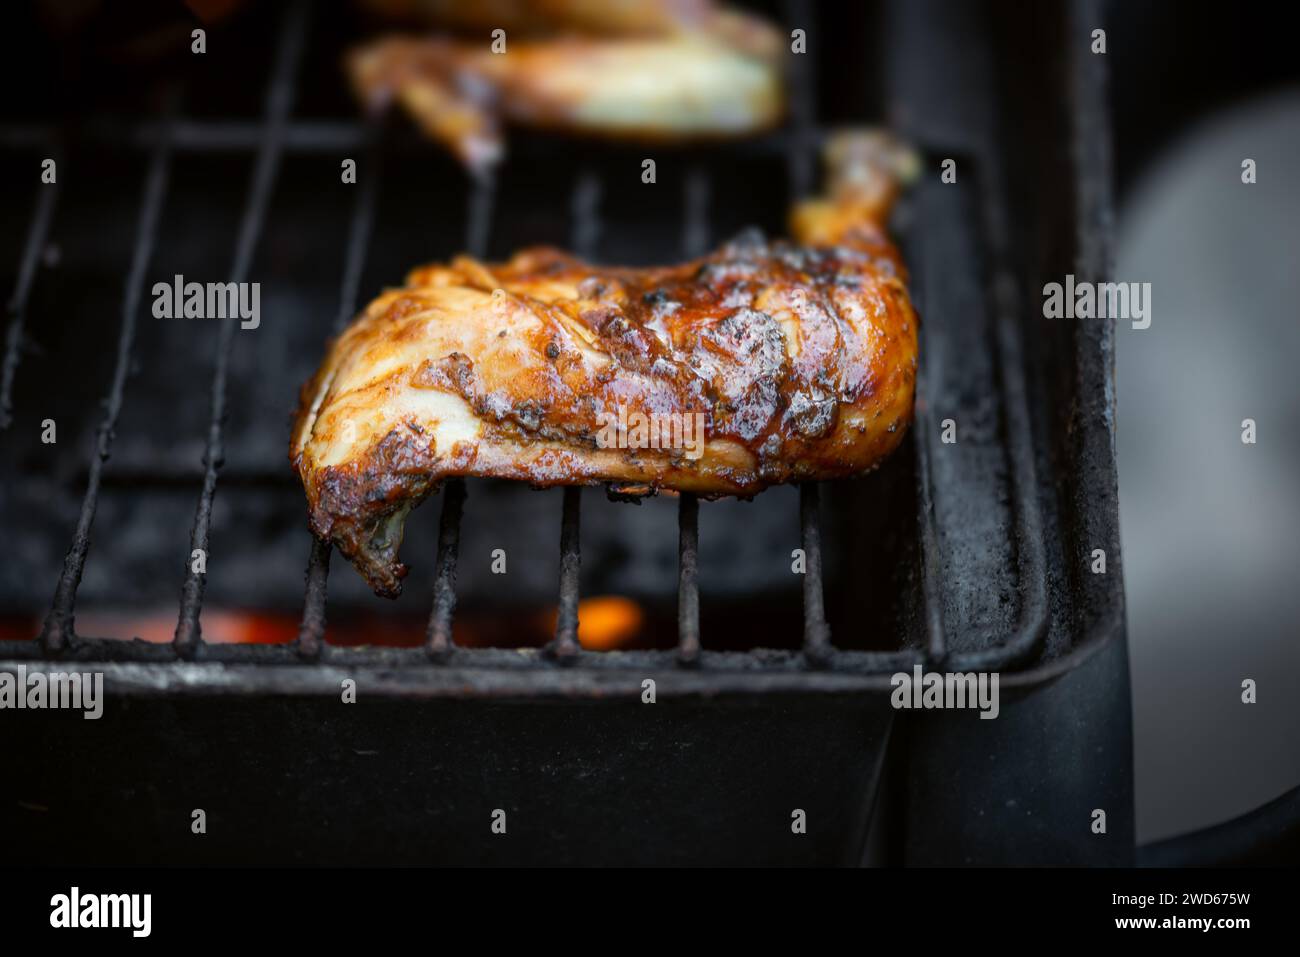 Barbeque pit chicken leg and thigh covered in BBQ sauce and spices and homemade spicy sauce flavorful Caribbean taste Stock Photo